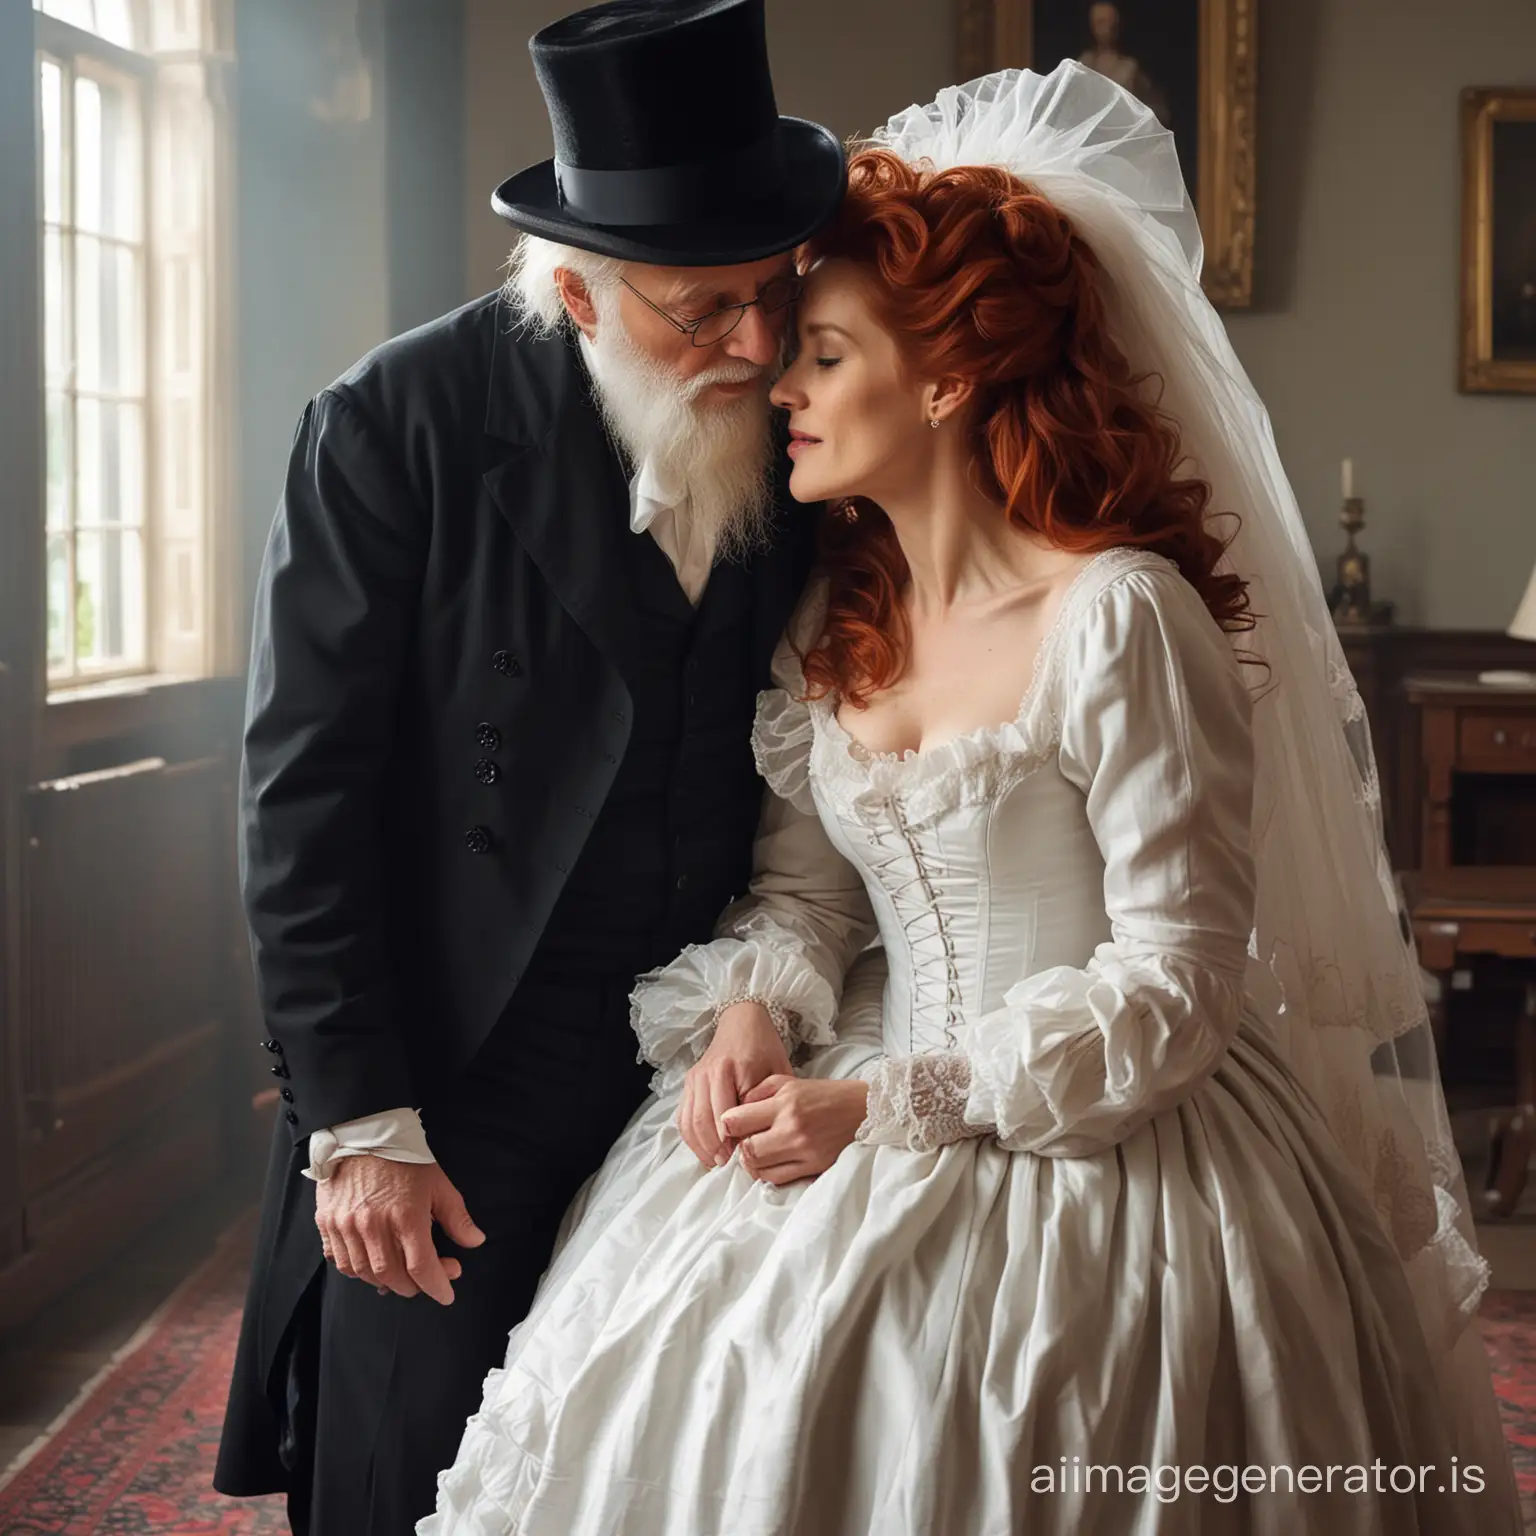 red hair Gillian Anderson wearing a poofy black floor-length loose billowing 1860 victorian crinoline dress with  a frilly bonnet kissing an old man who seems to be her newlywed husband
